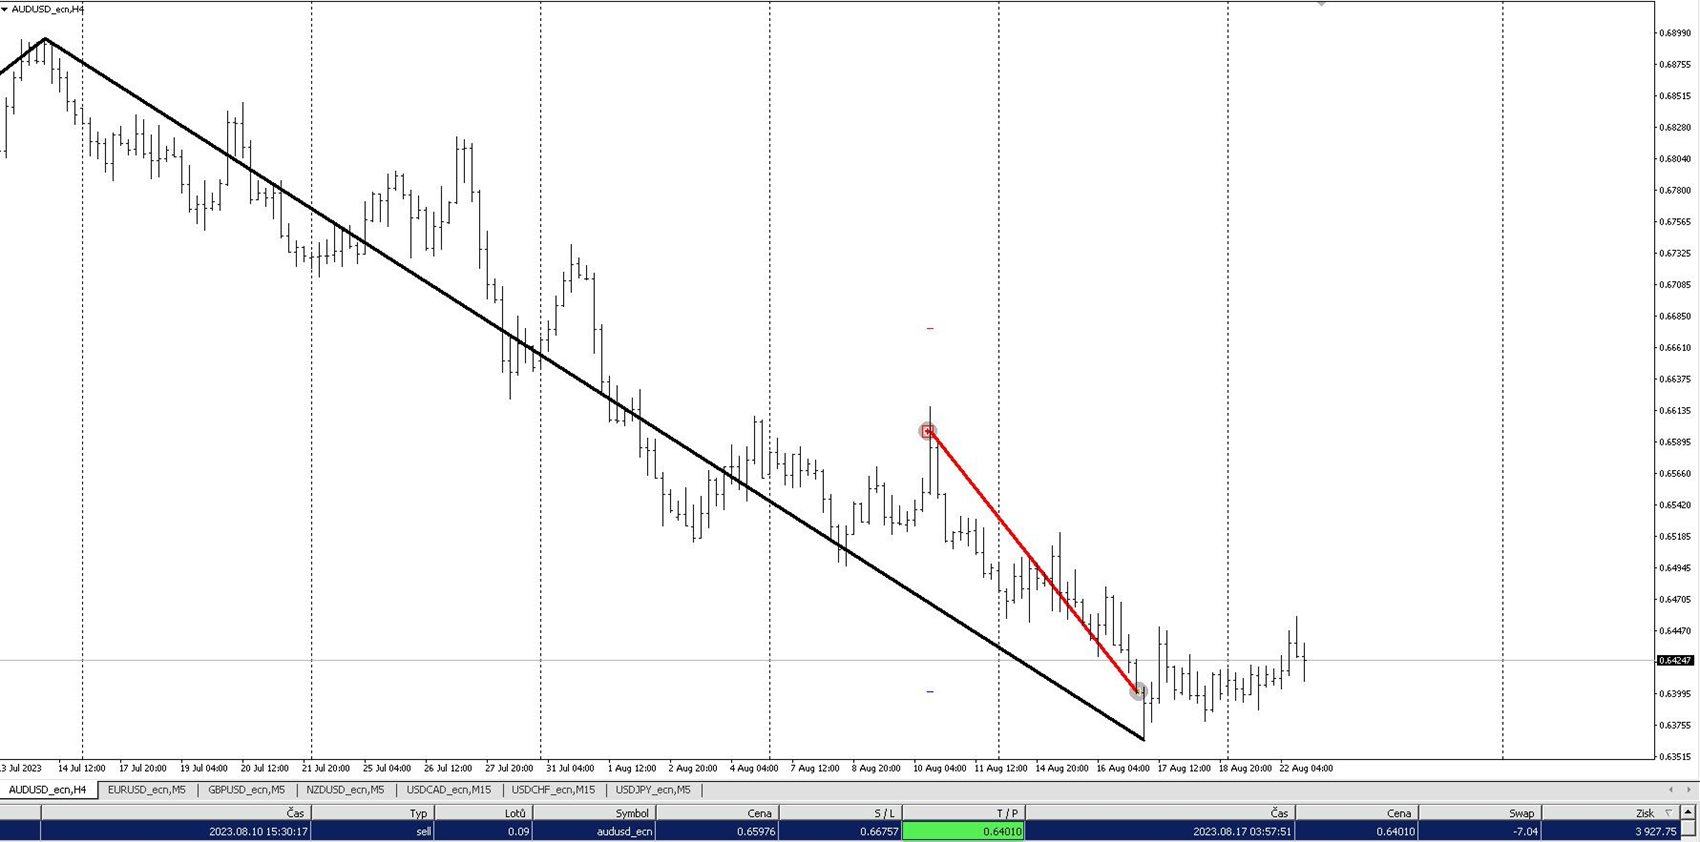 Downtrend, Red line indicates a profitable trade in the direction of the trend [AUDUSD H4]